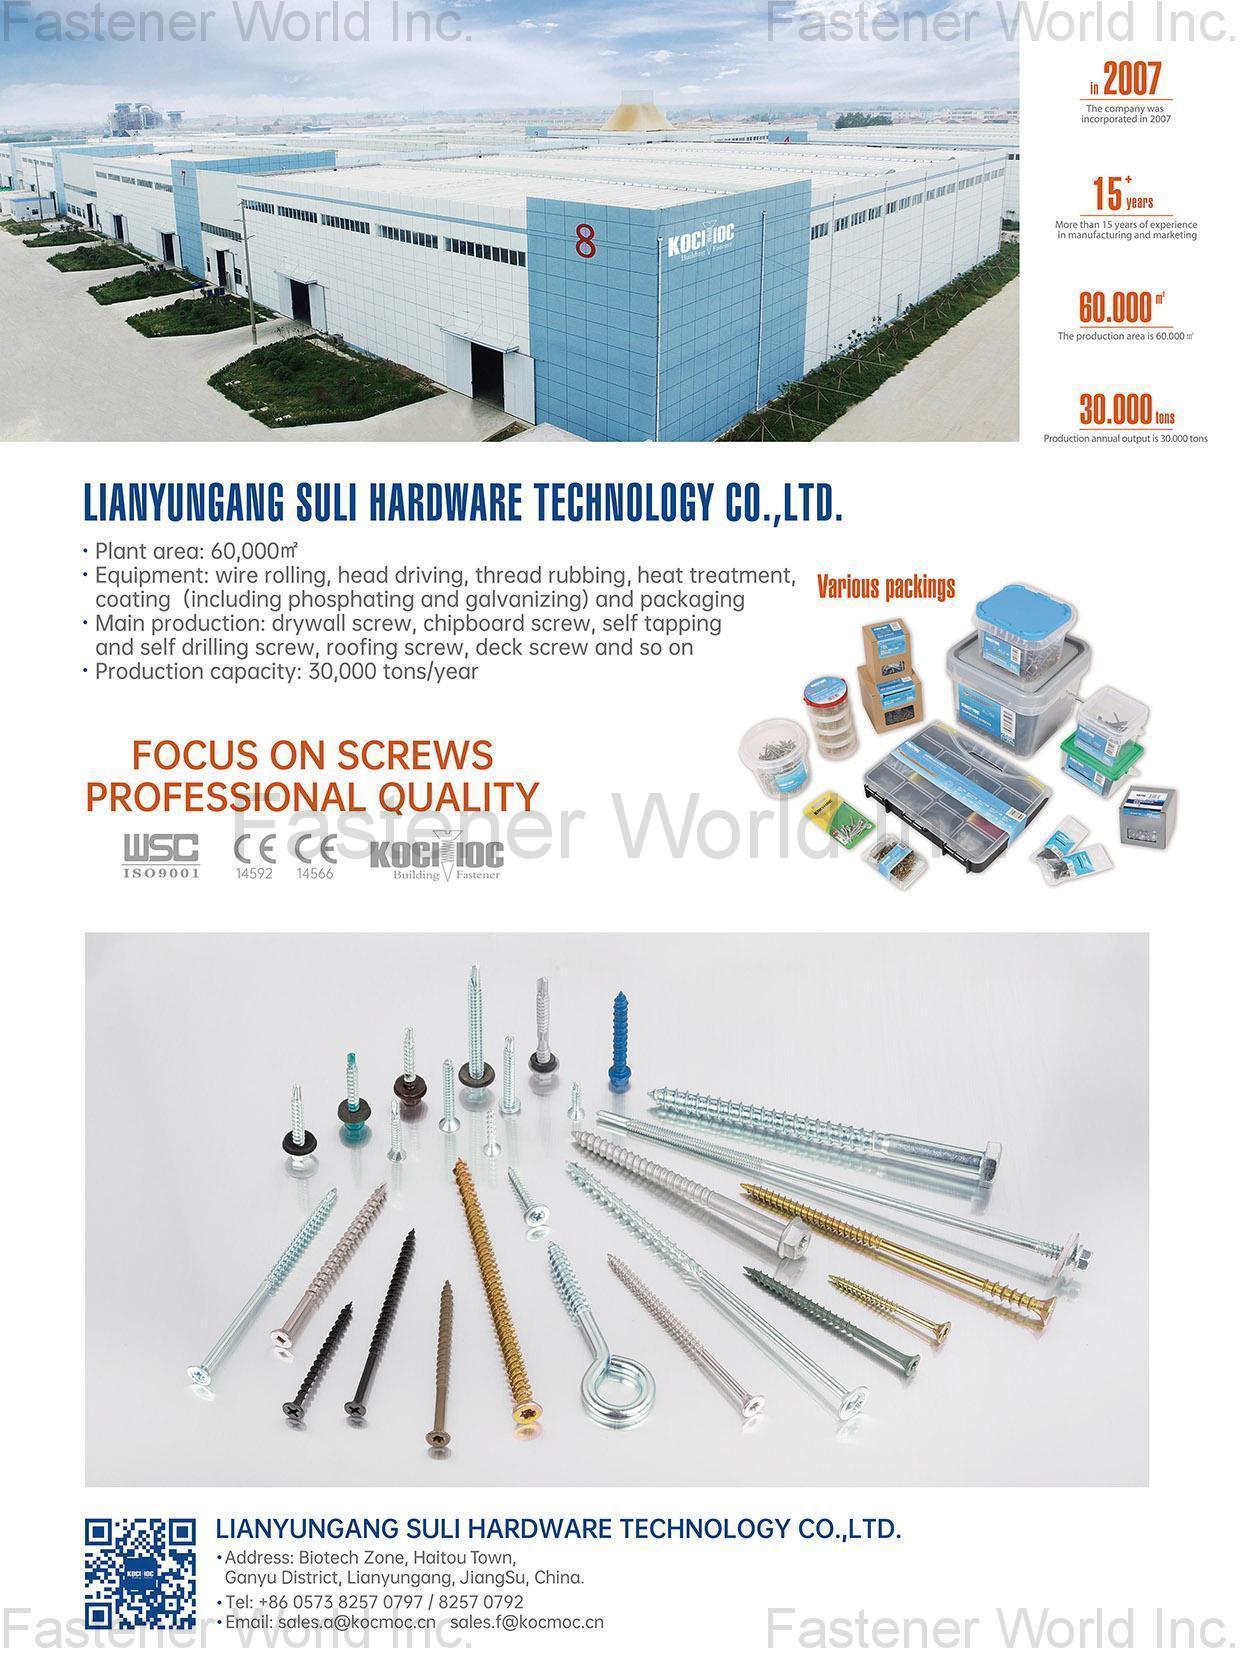 LIANYUNGANG SULI HARDWARE TECHNOLOGY CO., LTD. (Jiaxing Chiayo) , Drywall Screw, Chipboard Screws, Self Tapping and Self Drilling Screws, Roofing Screws, Deck Screws...